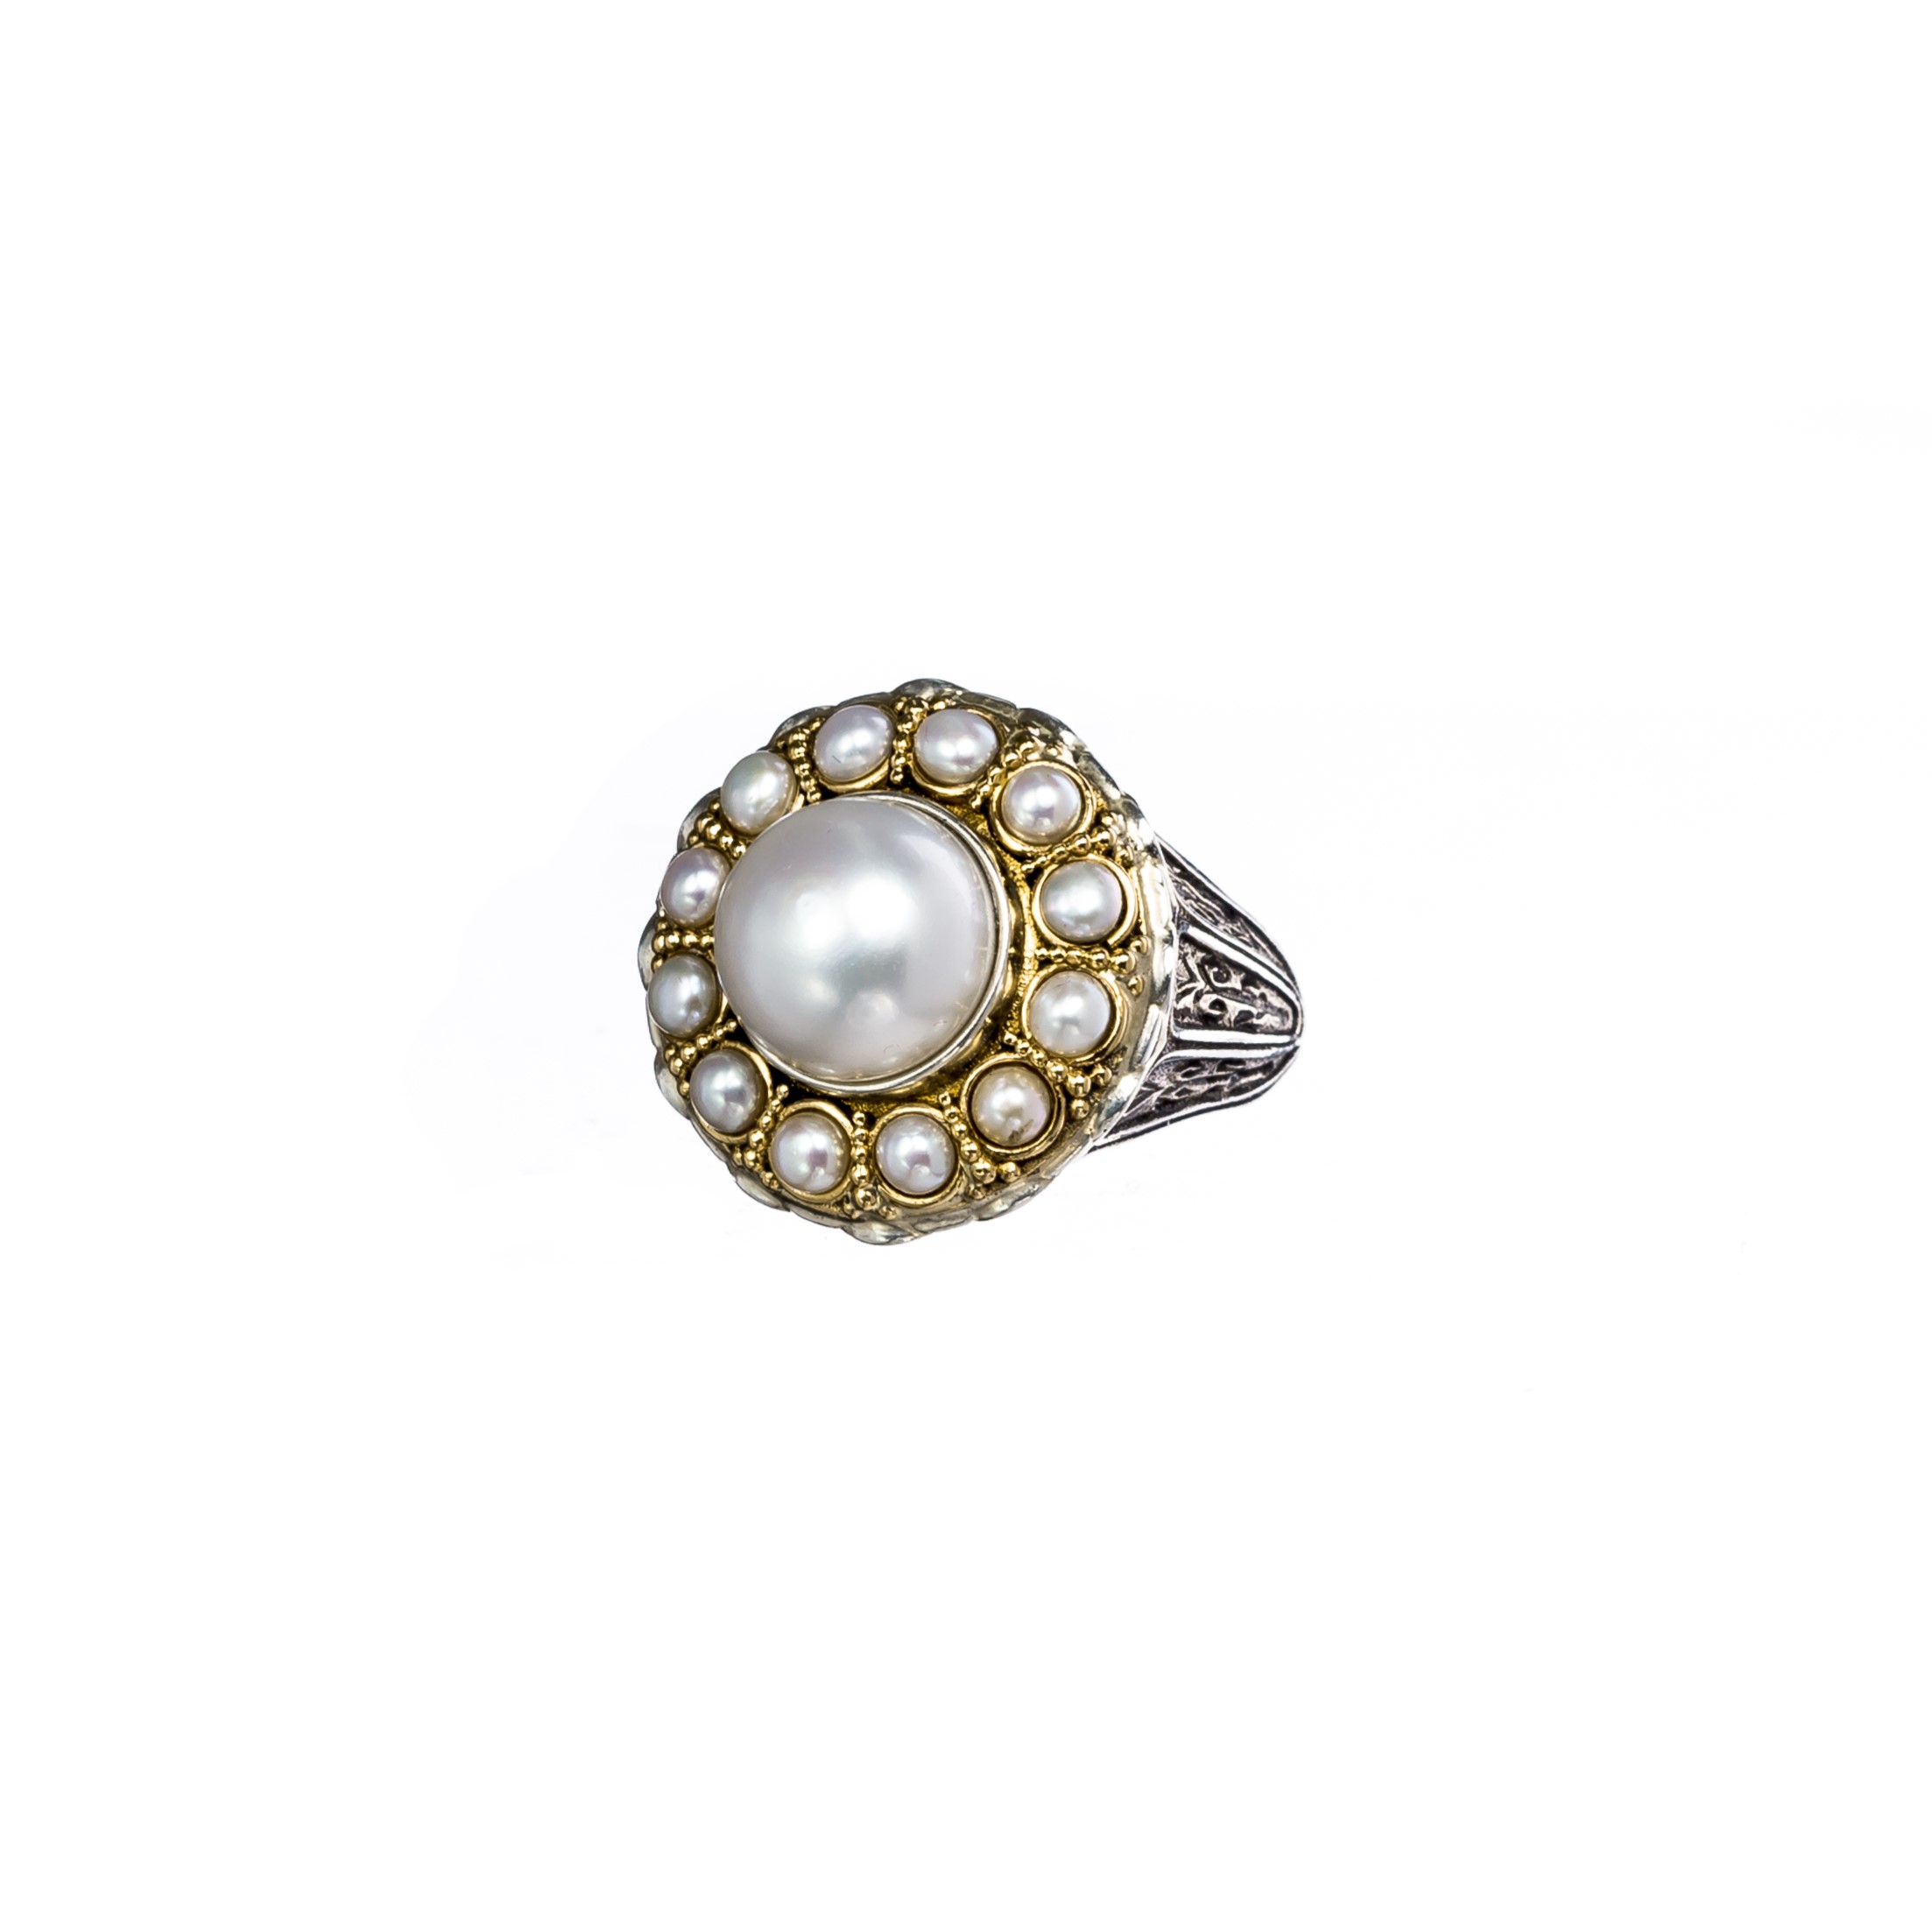 Santorini ring in 18K Gold and Sterling Silver with pearls